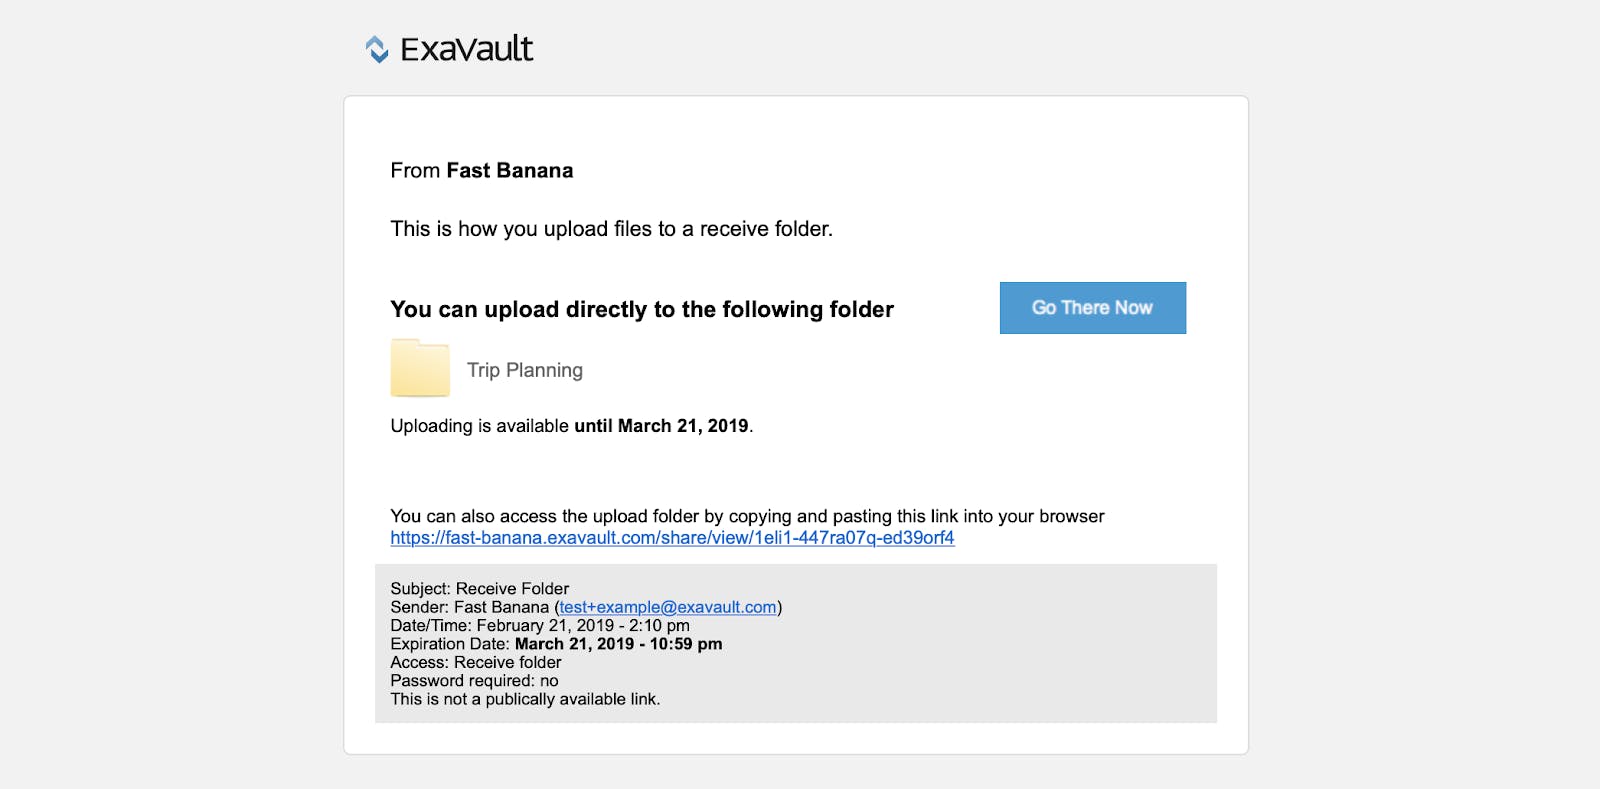 Email invite for customers to upload files to a receive folder in ExaVault.